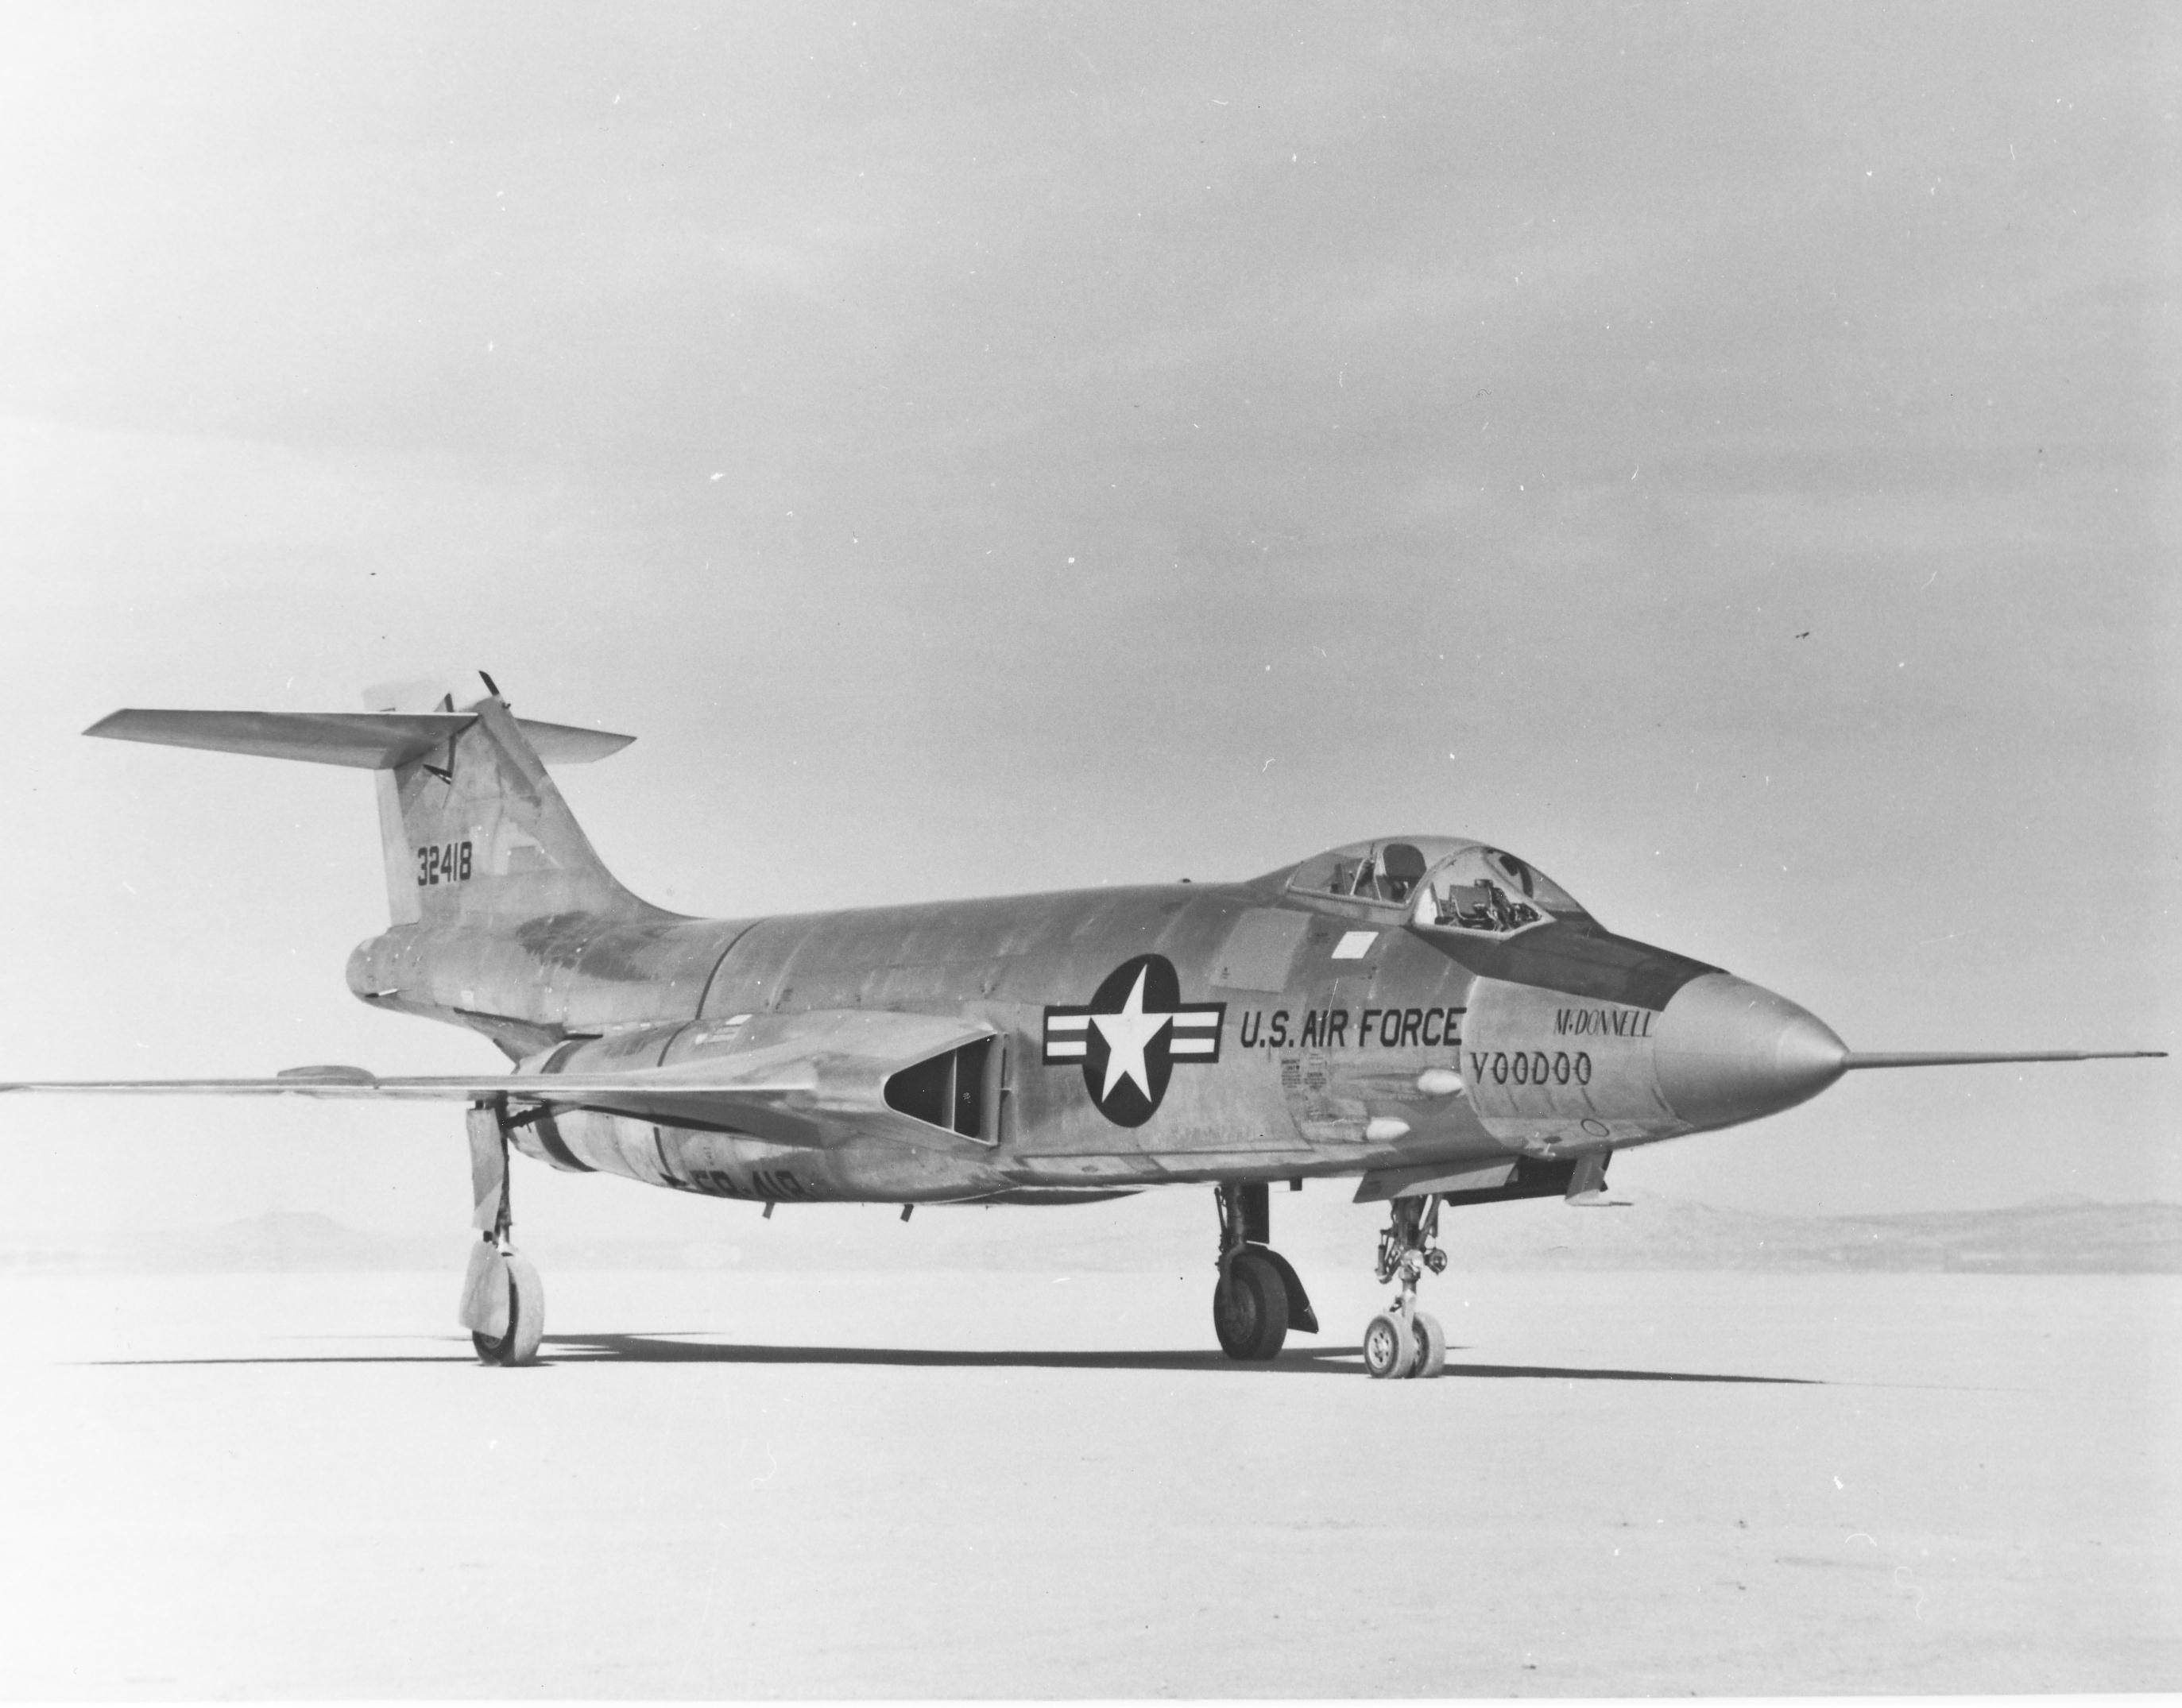 mcDonnell F-101A-1-MC Voodoo 53-2418, right front quarter view. (U.S. Air Force)